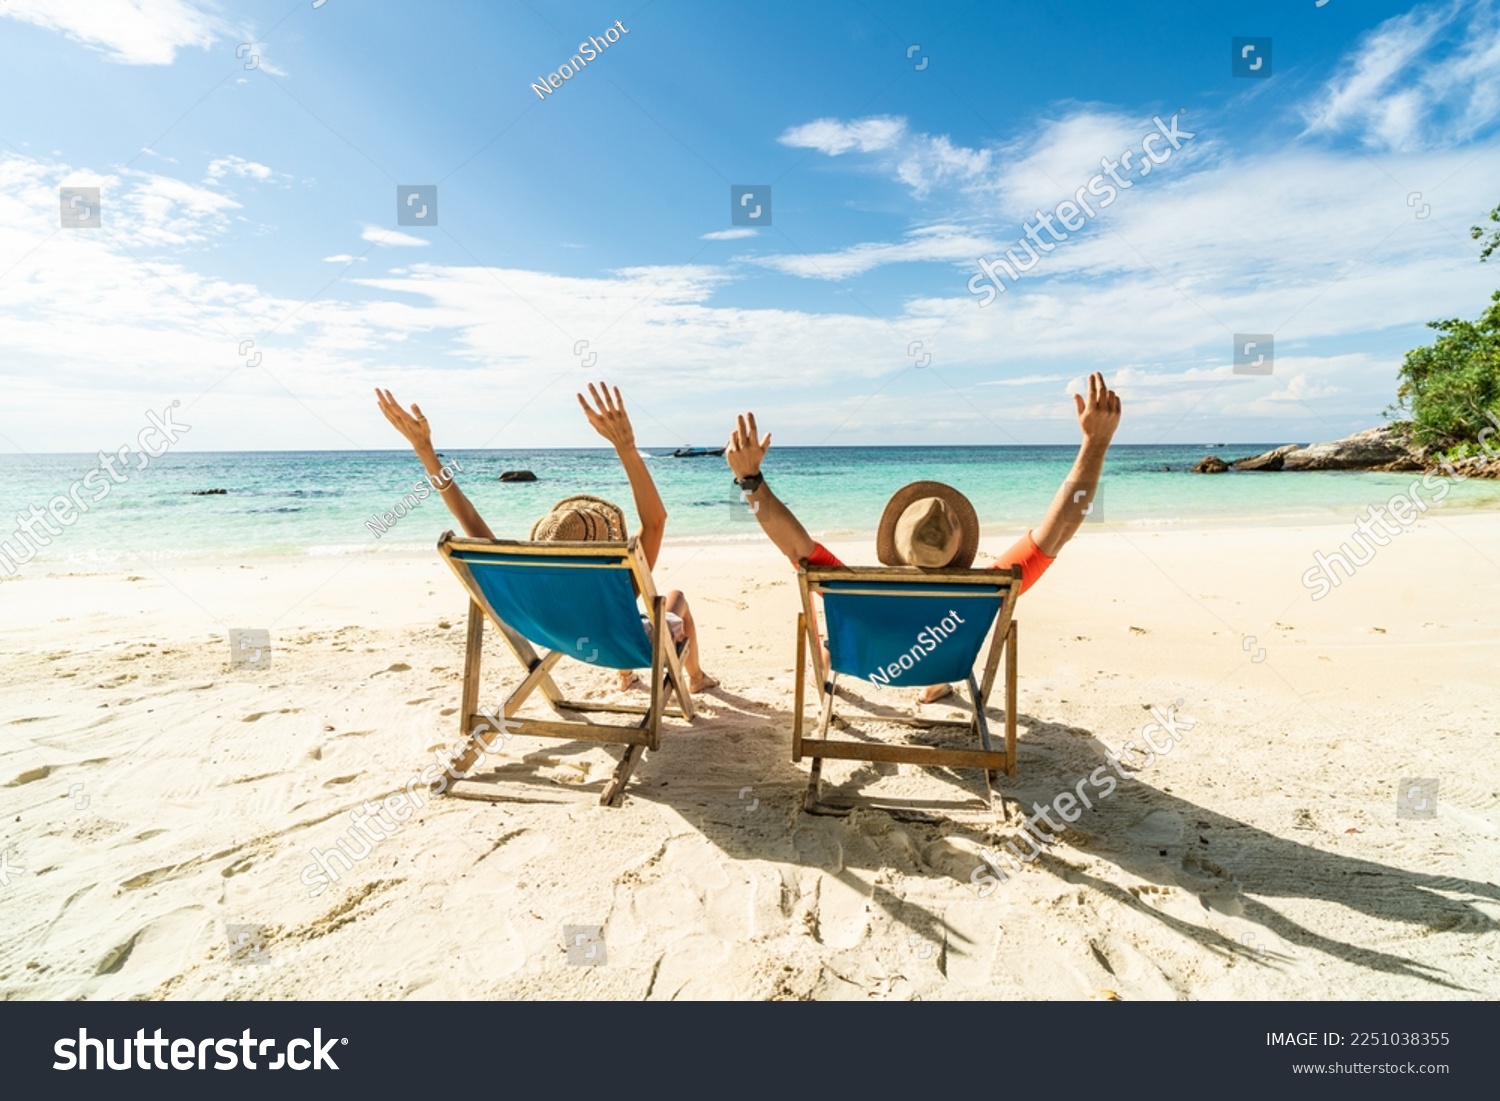 Two happy people having fun on the beach, sitting on blue sunbed with hands raised up, spending leisure time together. Summer holidays concept. Tourism. Travelers.
 #2251038355